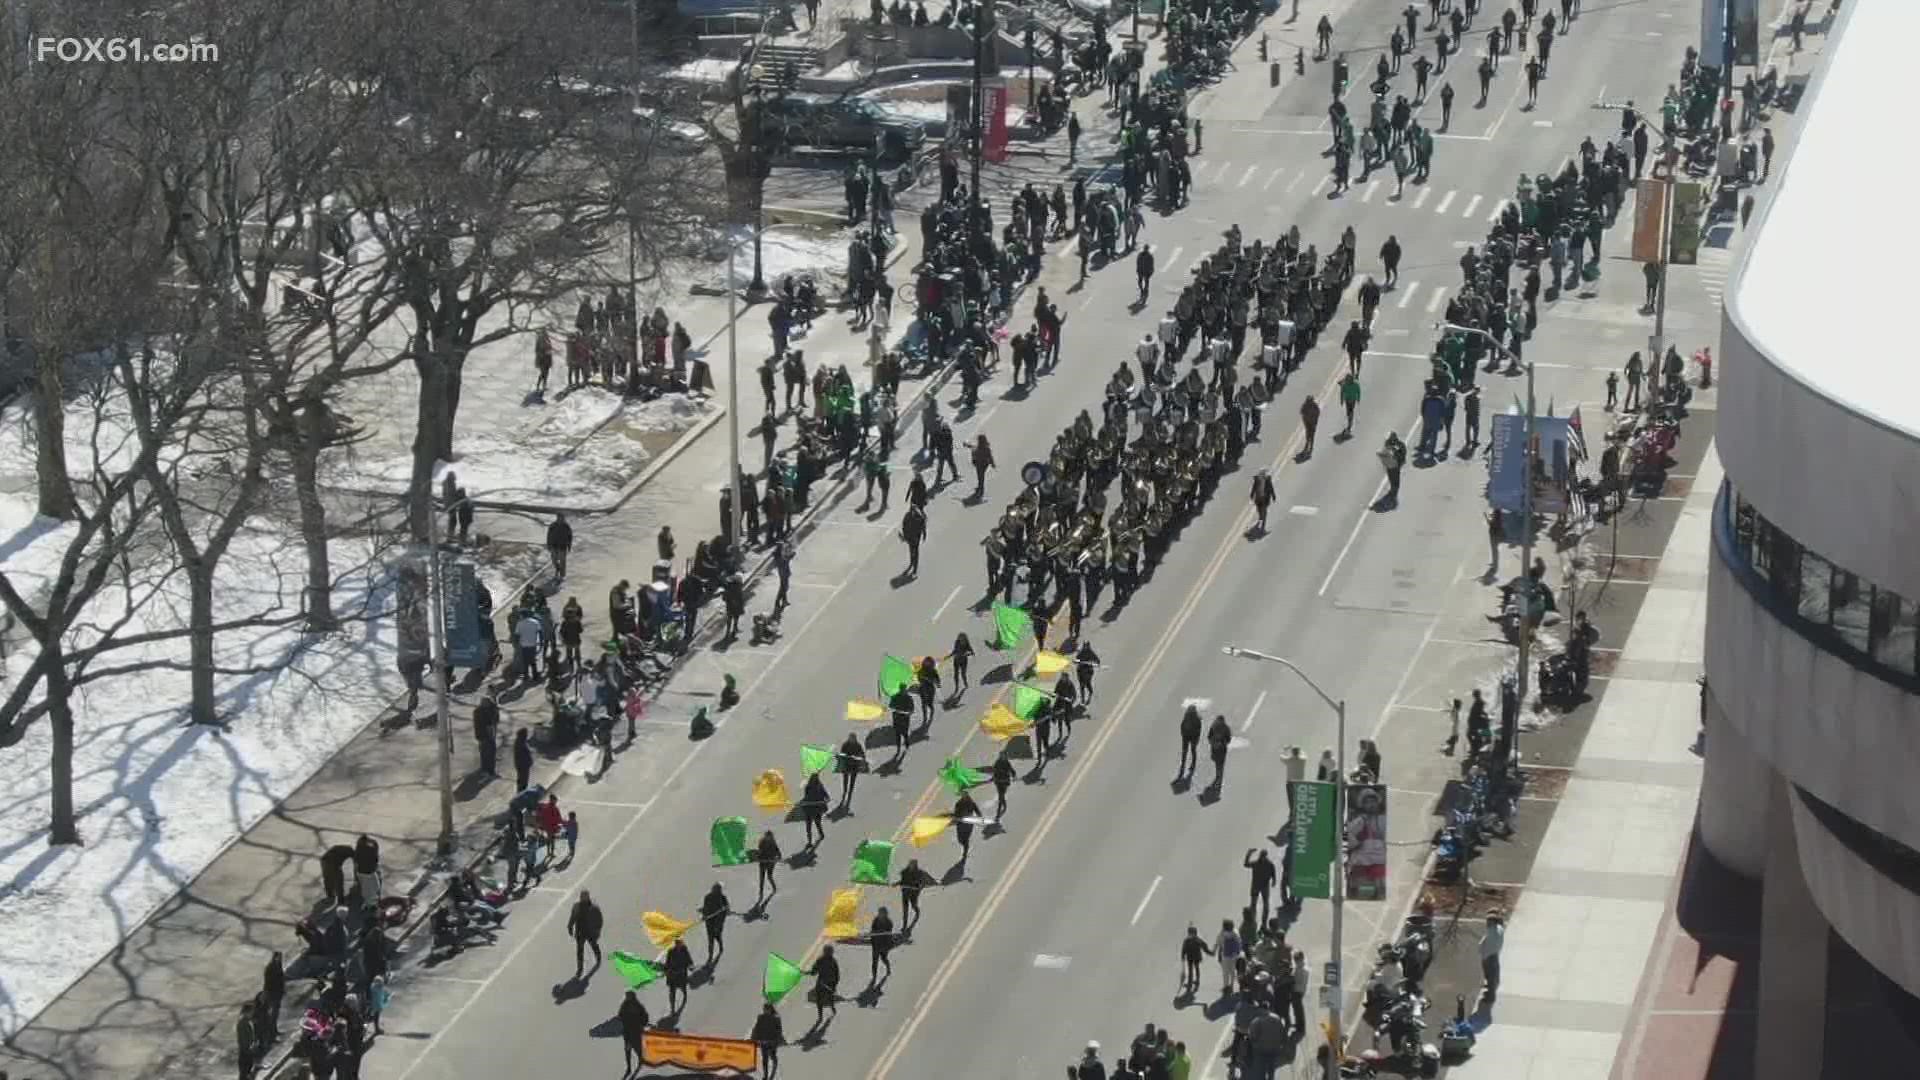 It's been absent since 2019, but the Greater Hartford Saint Patrick’s Day Parade is back on.